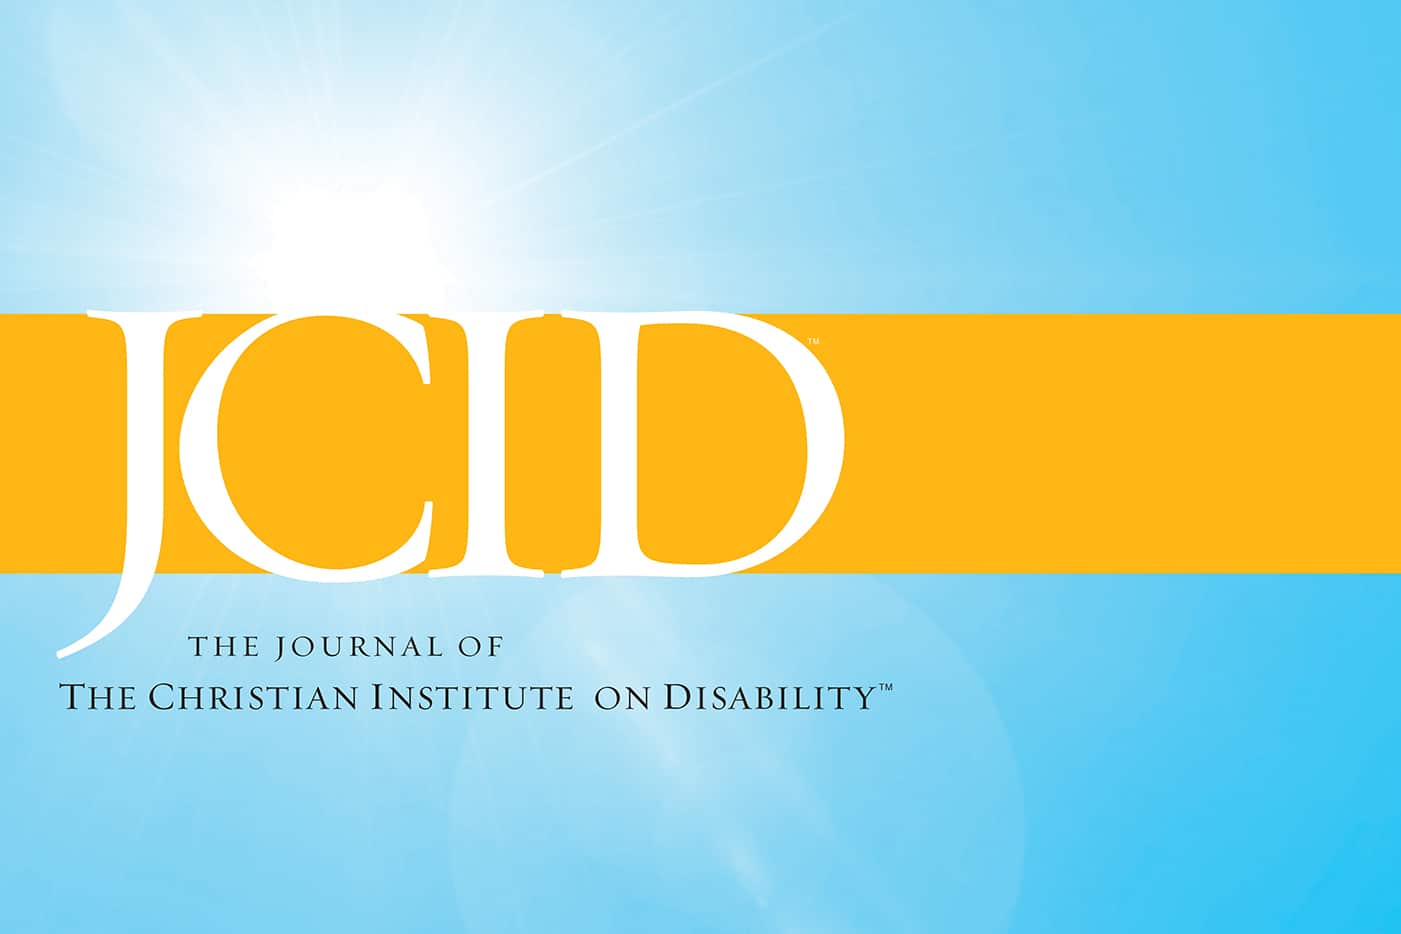 JCID The Journal of the Christian Institute on Disability